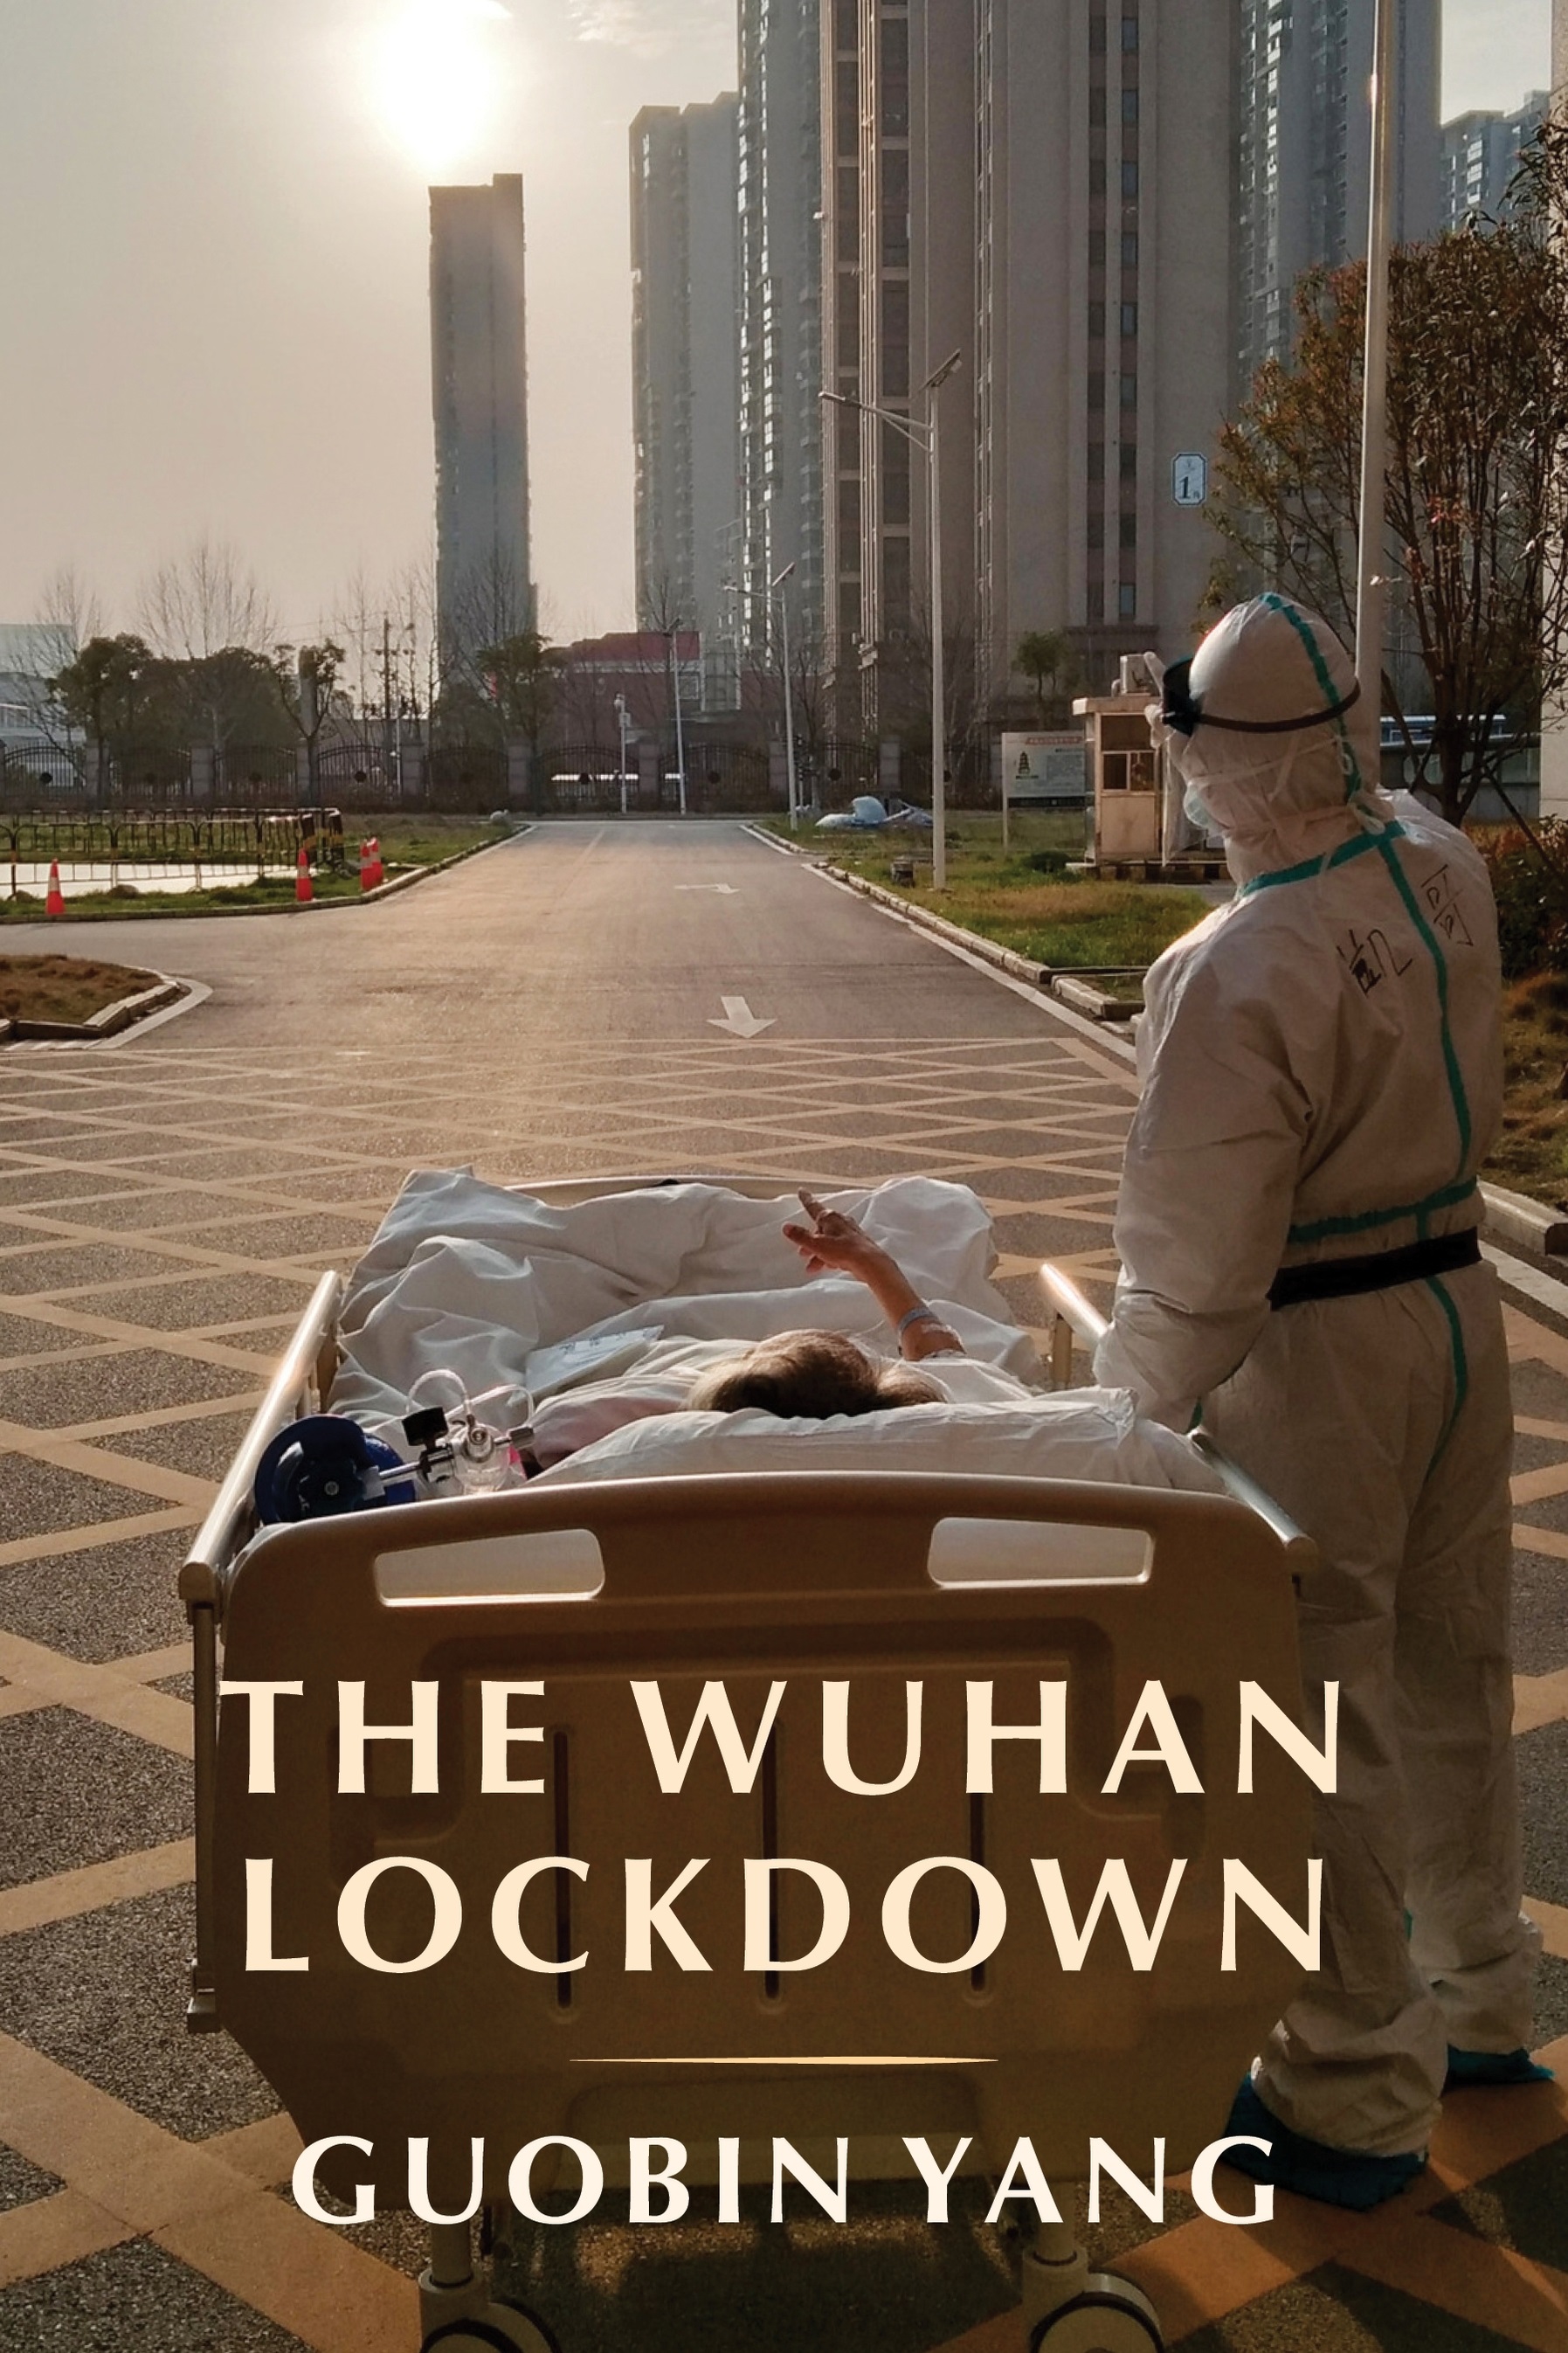 Cover of the book called "The Wuhan Lockdown by Guobin Yang." The image shows a person fully covered in what appears like a hazmat suit next to a person in a hospital bed. They are outside.